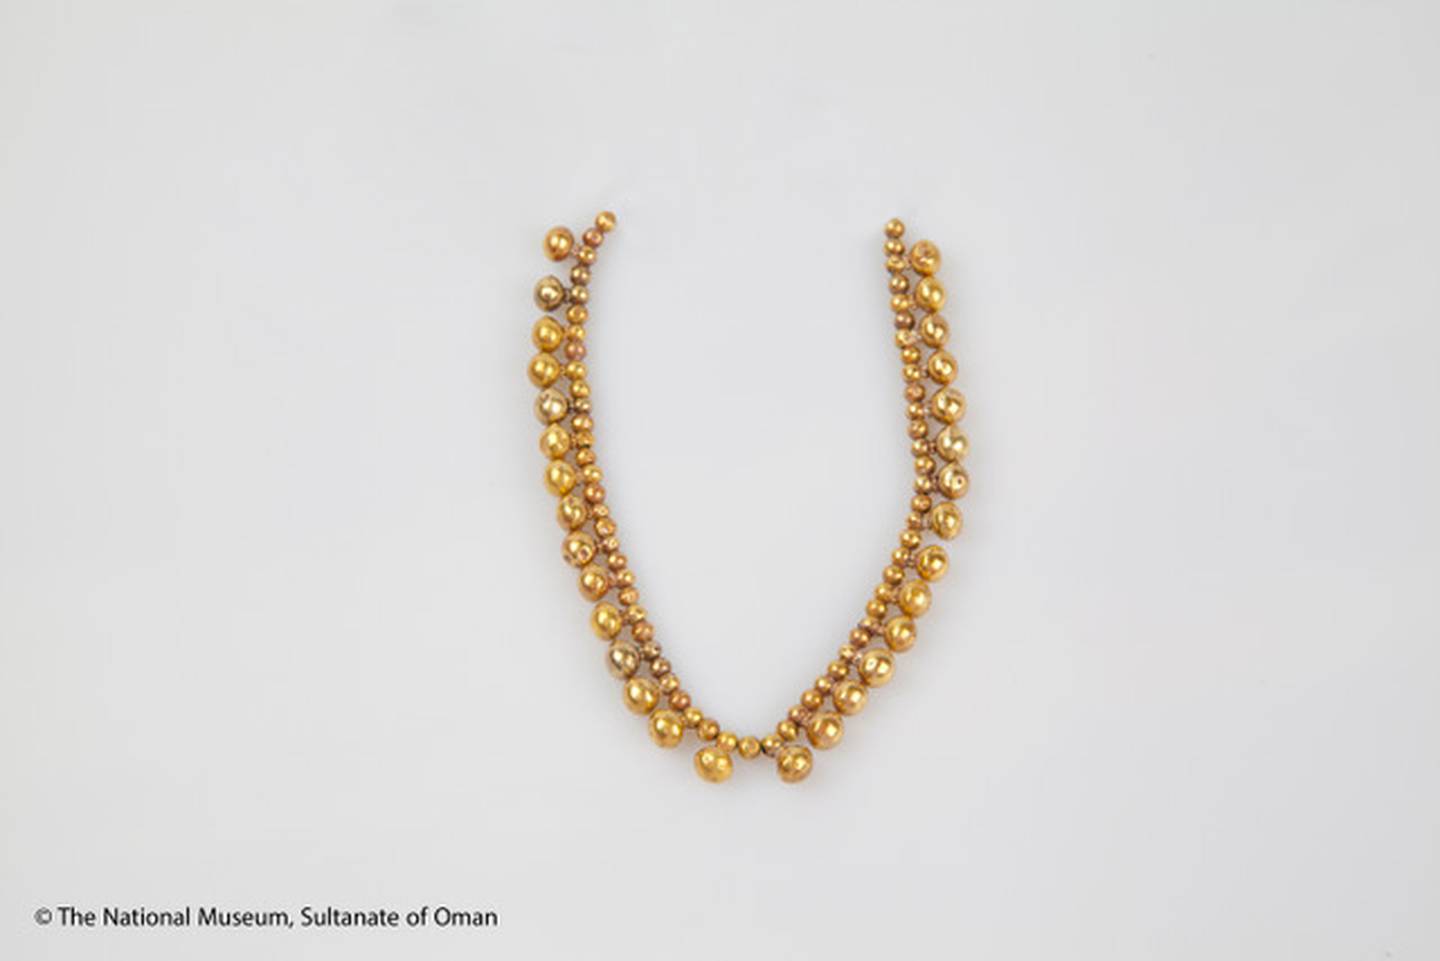 The artefacts include a gold necklace from the period between 300 BC and 400 AD. Photo: Sharjah Museums Authority